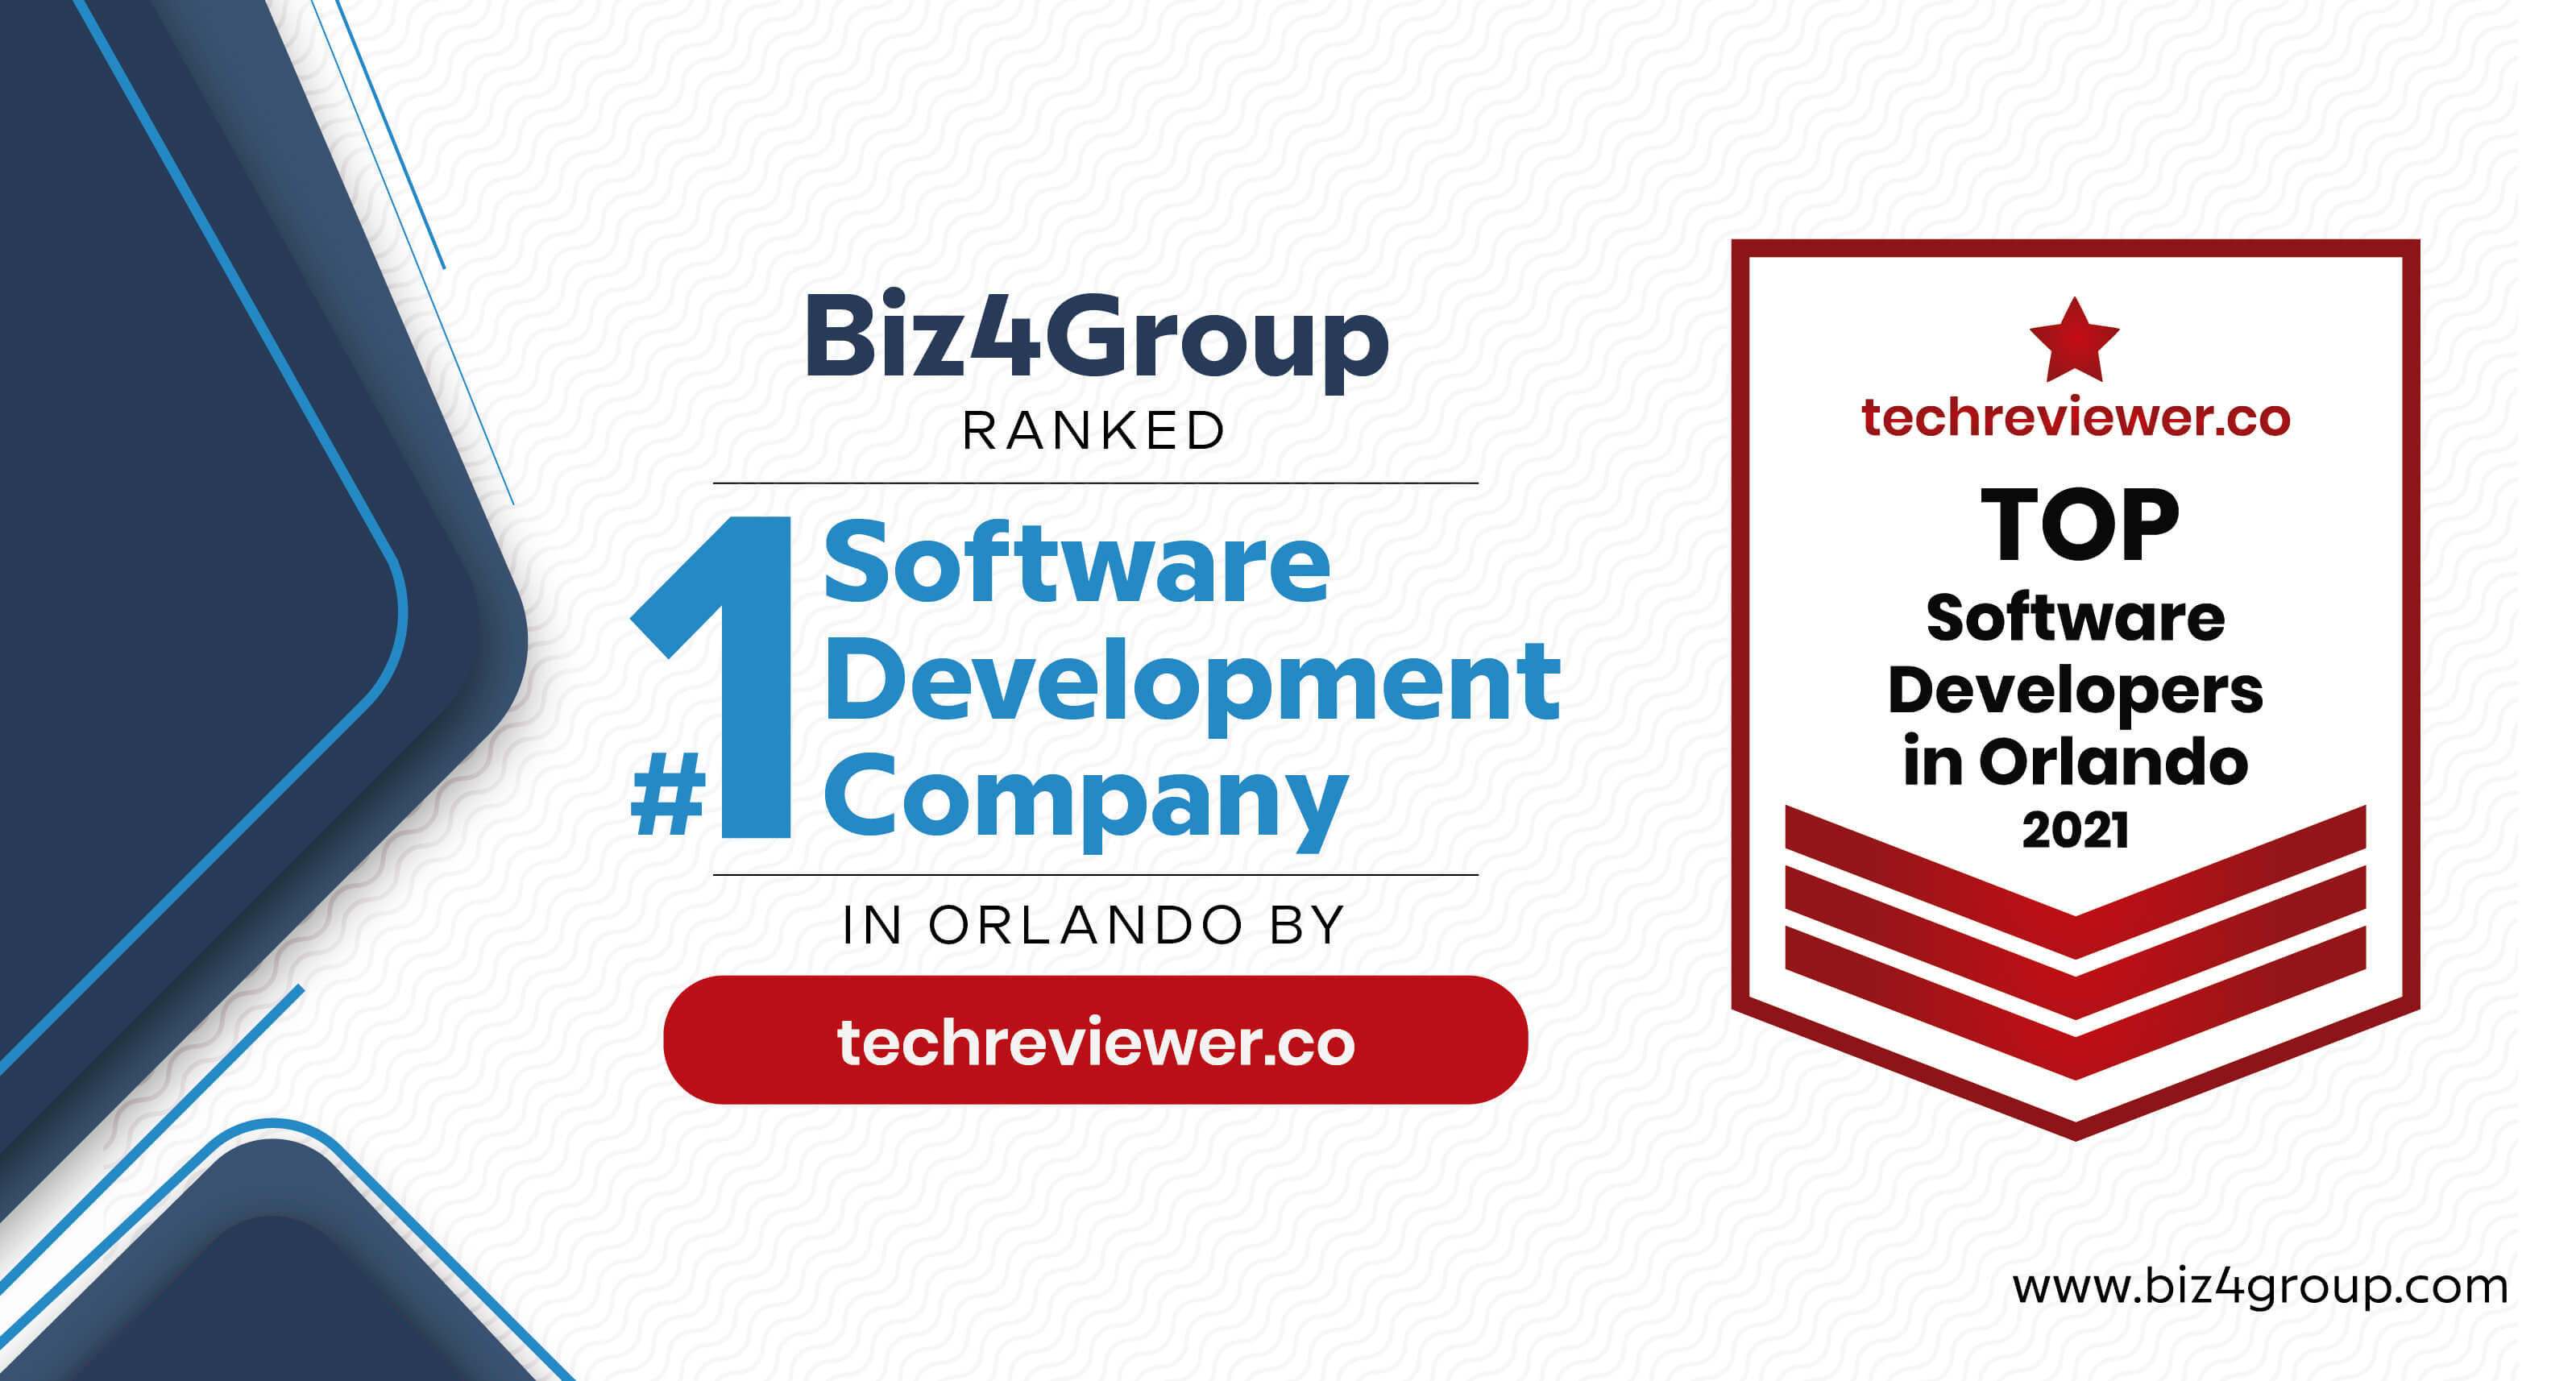 biz4group-ranked-no1-software-development-company-in-orlando-by-techreviewer